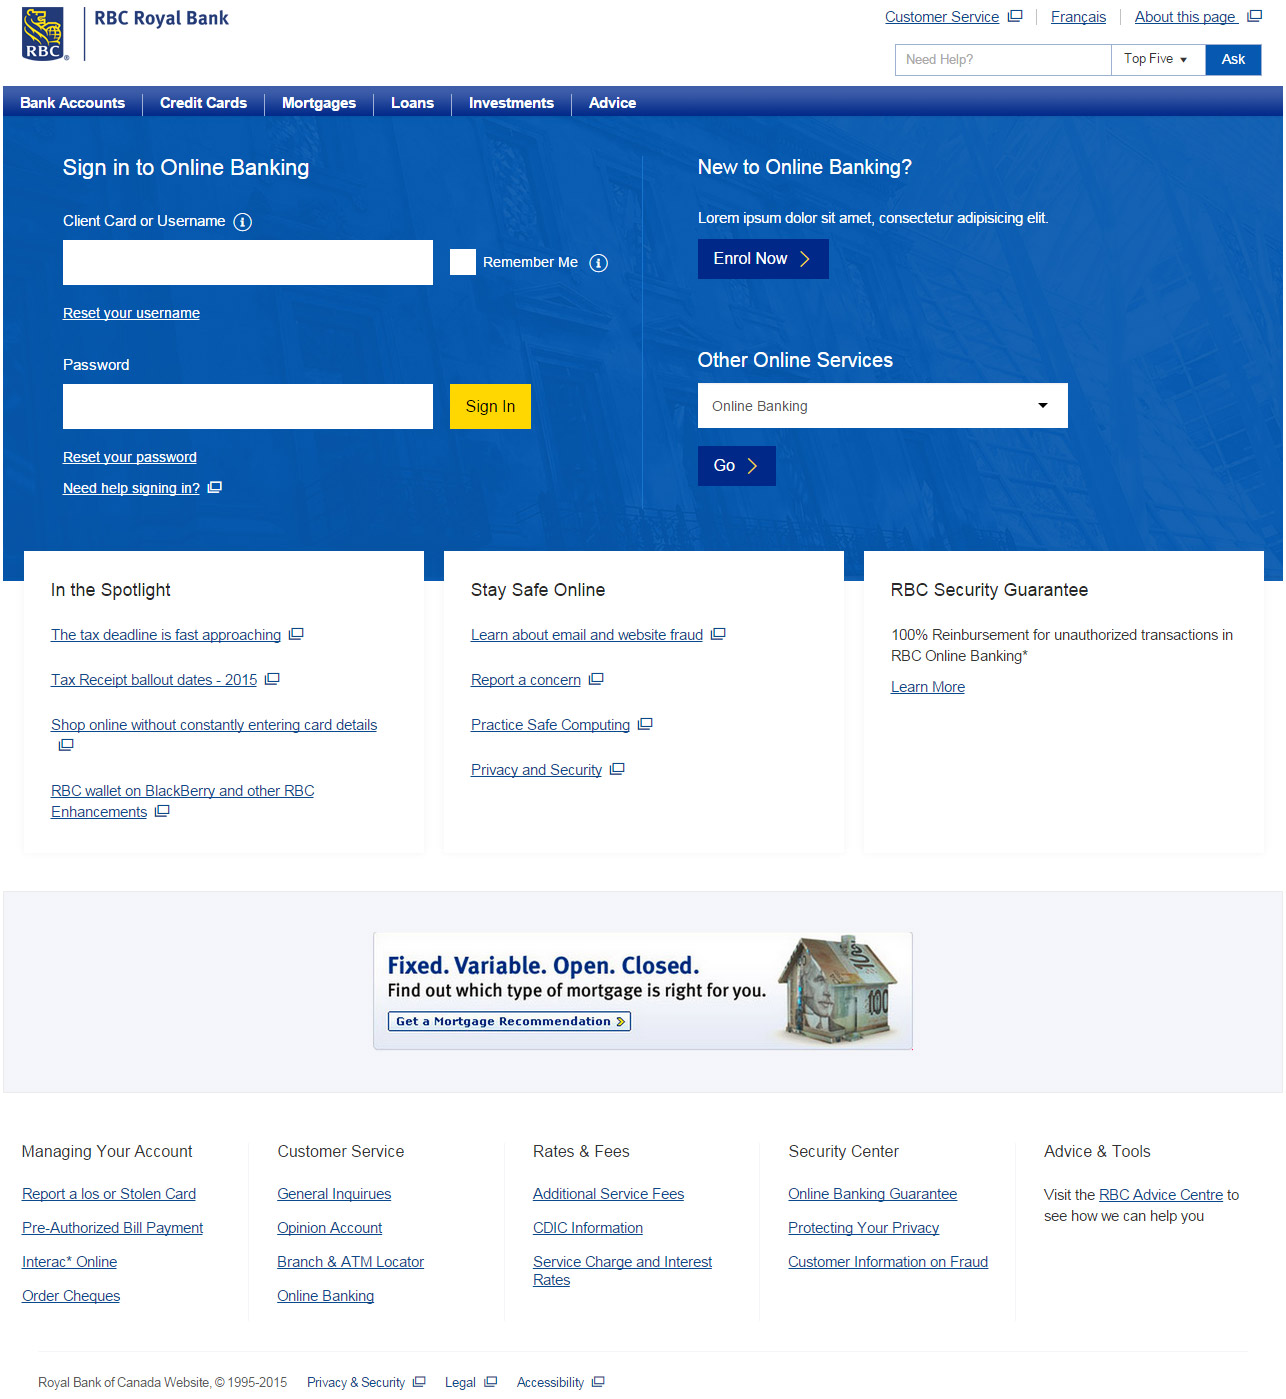 royal bank online investing fees in apr